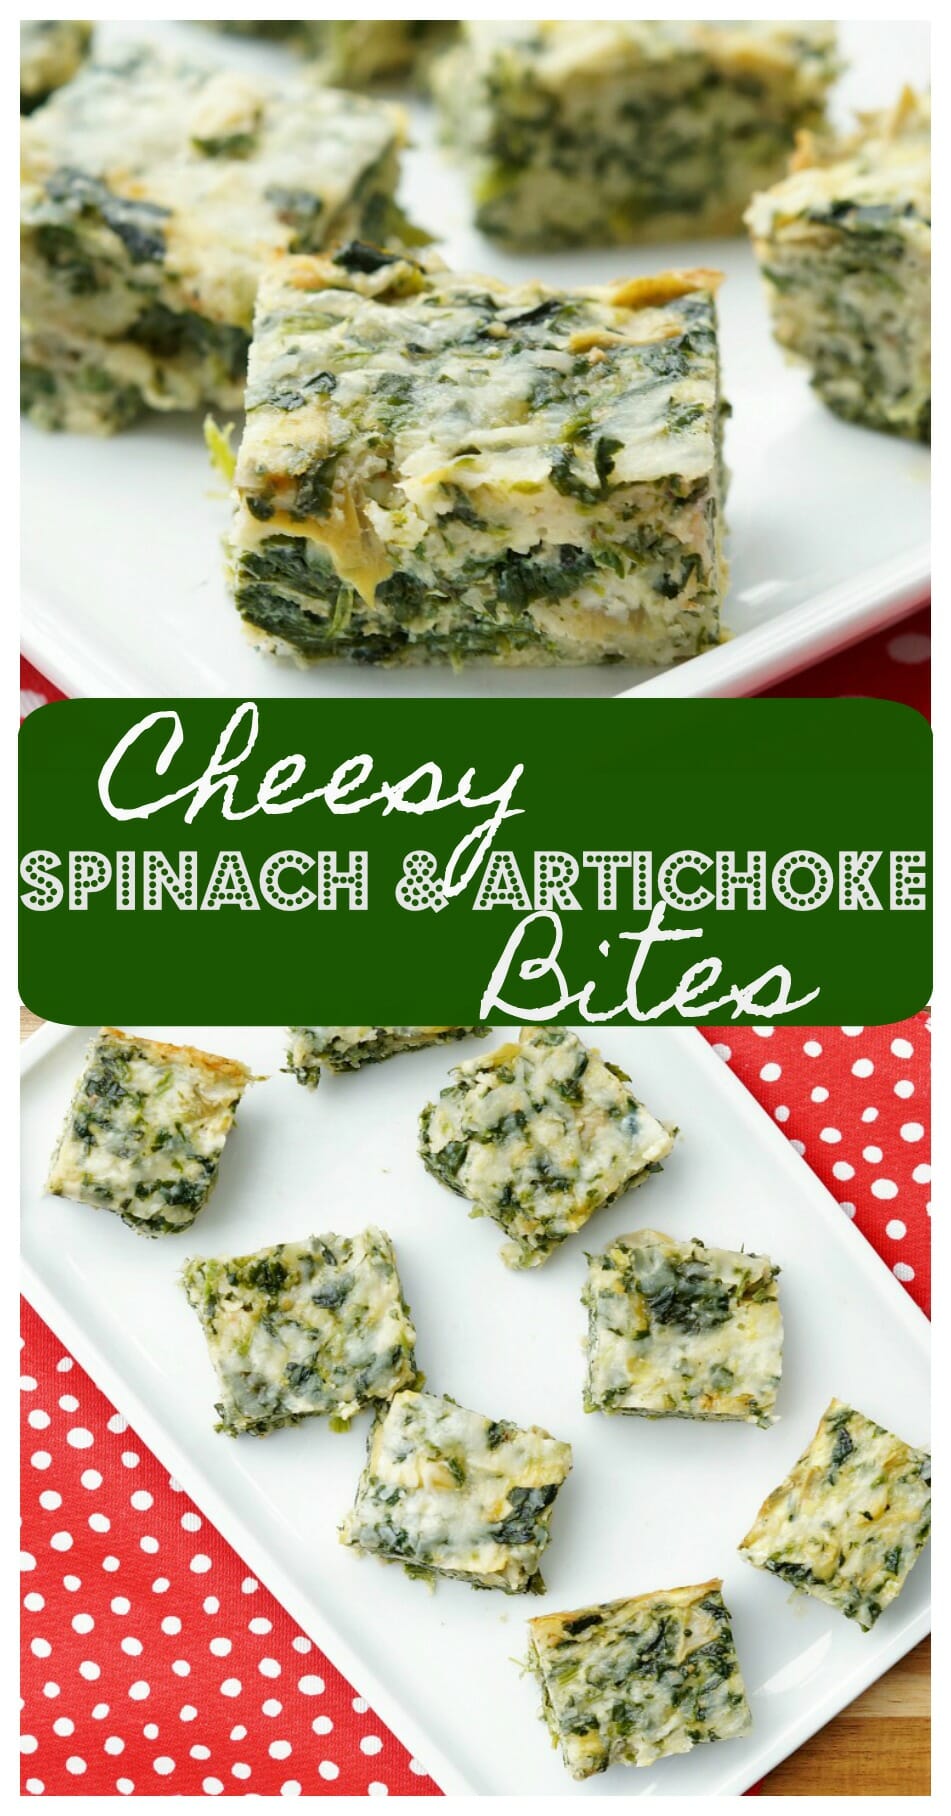 Cheesy Spinach and Artichoke Bites, perfect for breakfast, brunch, lunch or dinner! A delicious take on Spinach and Artichoke Dip!